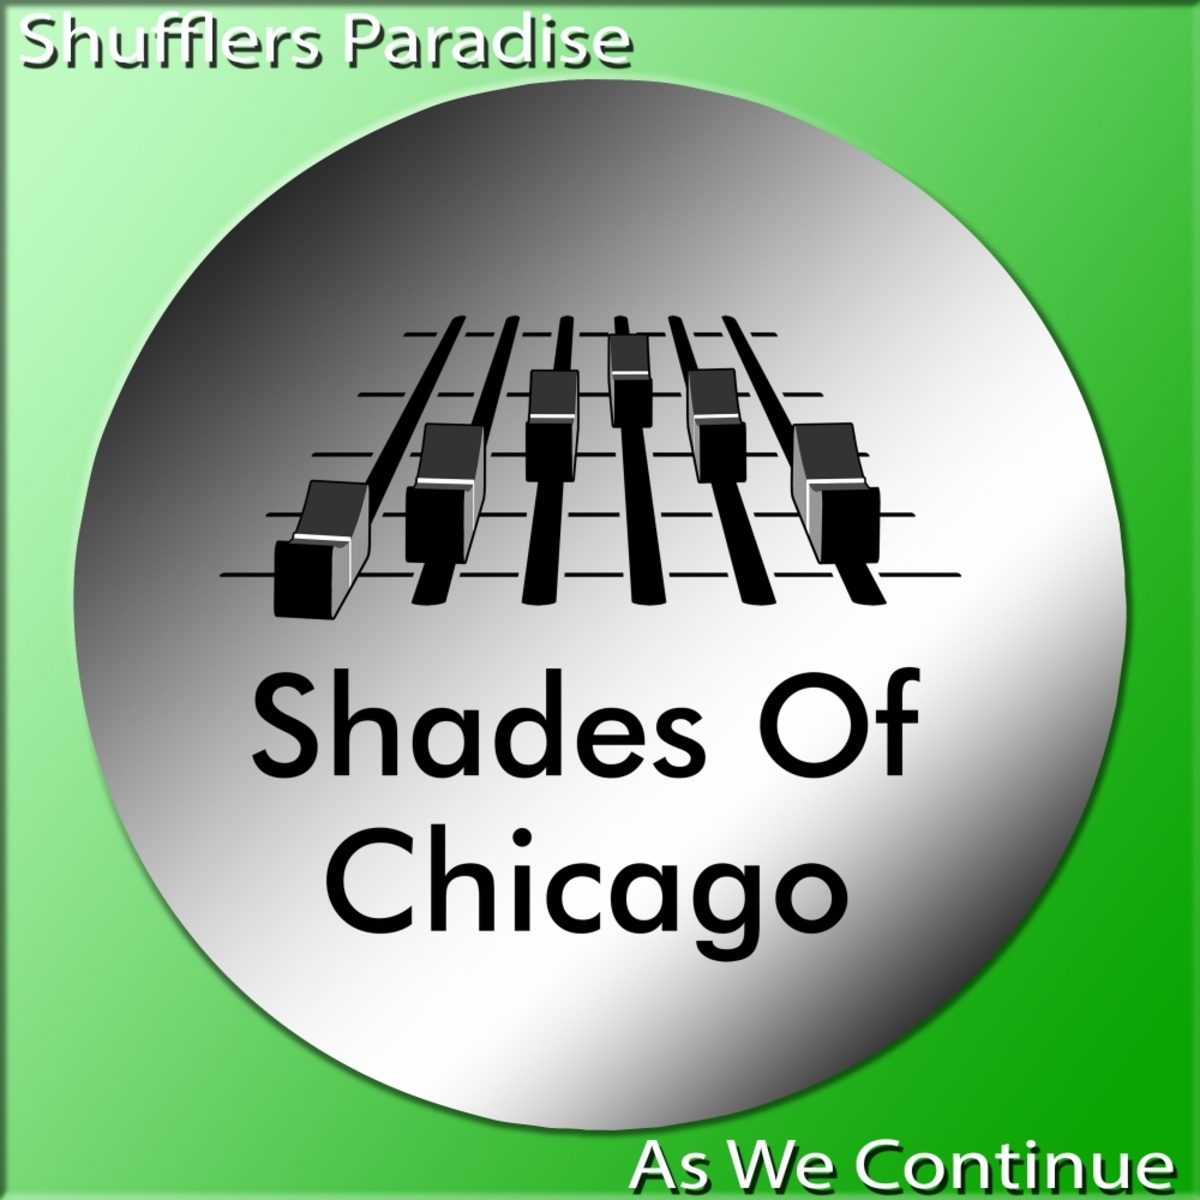 Shades Of Chicago - Shufflers Paradise / As We Continue / Melting Clock Records